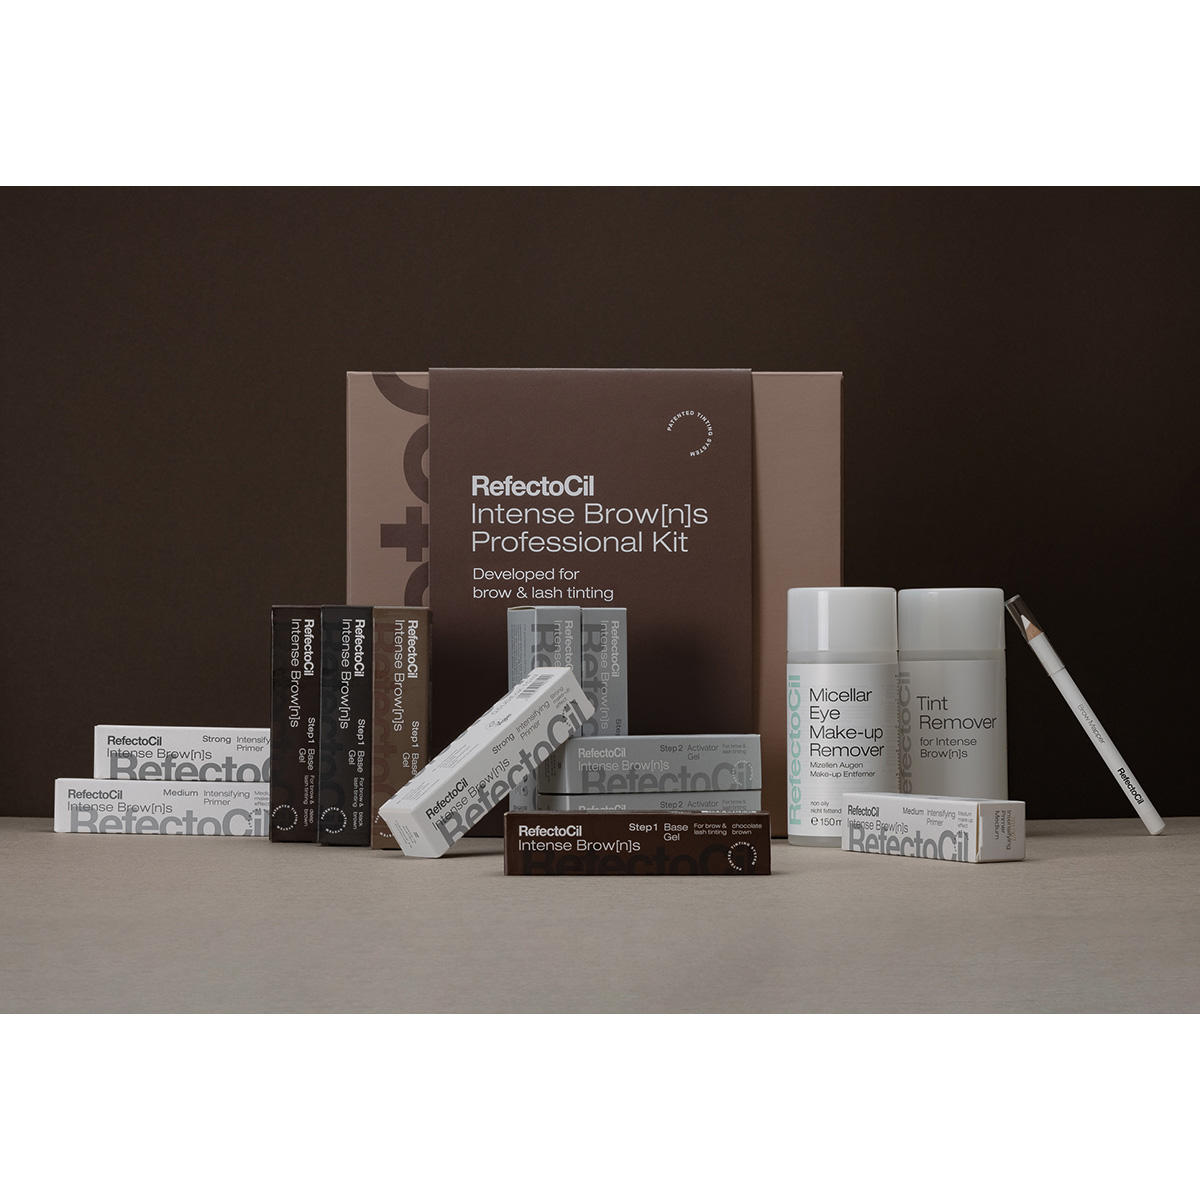 RefectoCil Intense Brow[n]s Kit professionnel  - 2